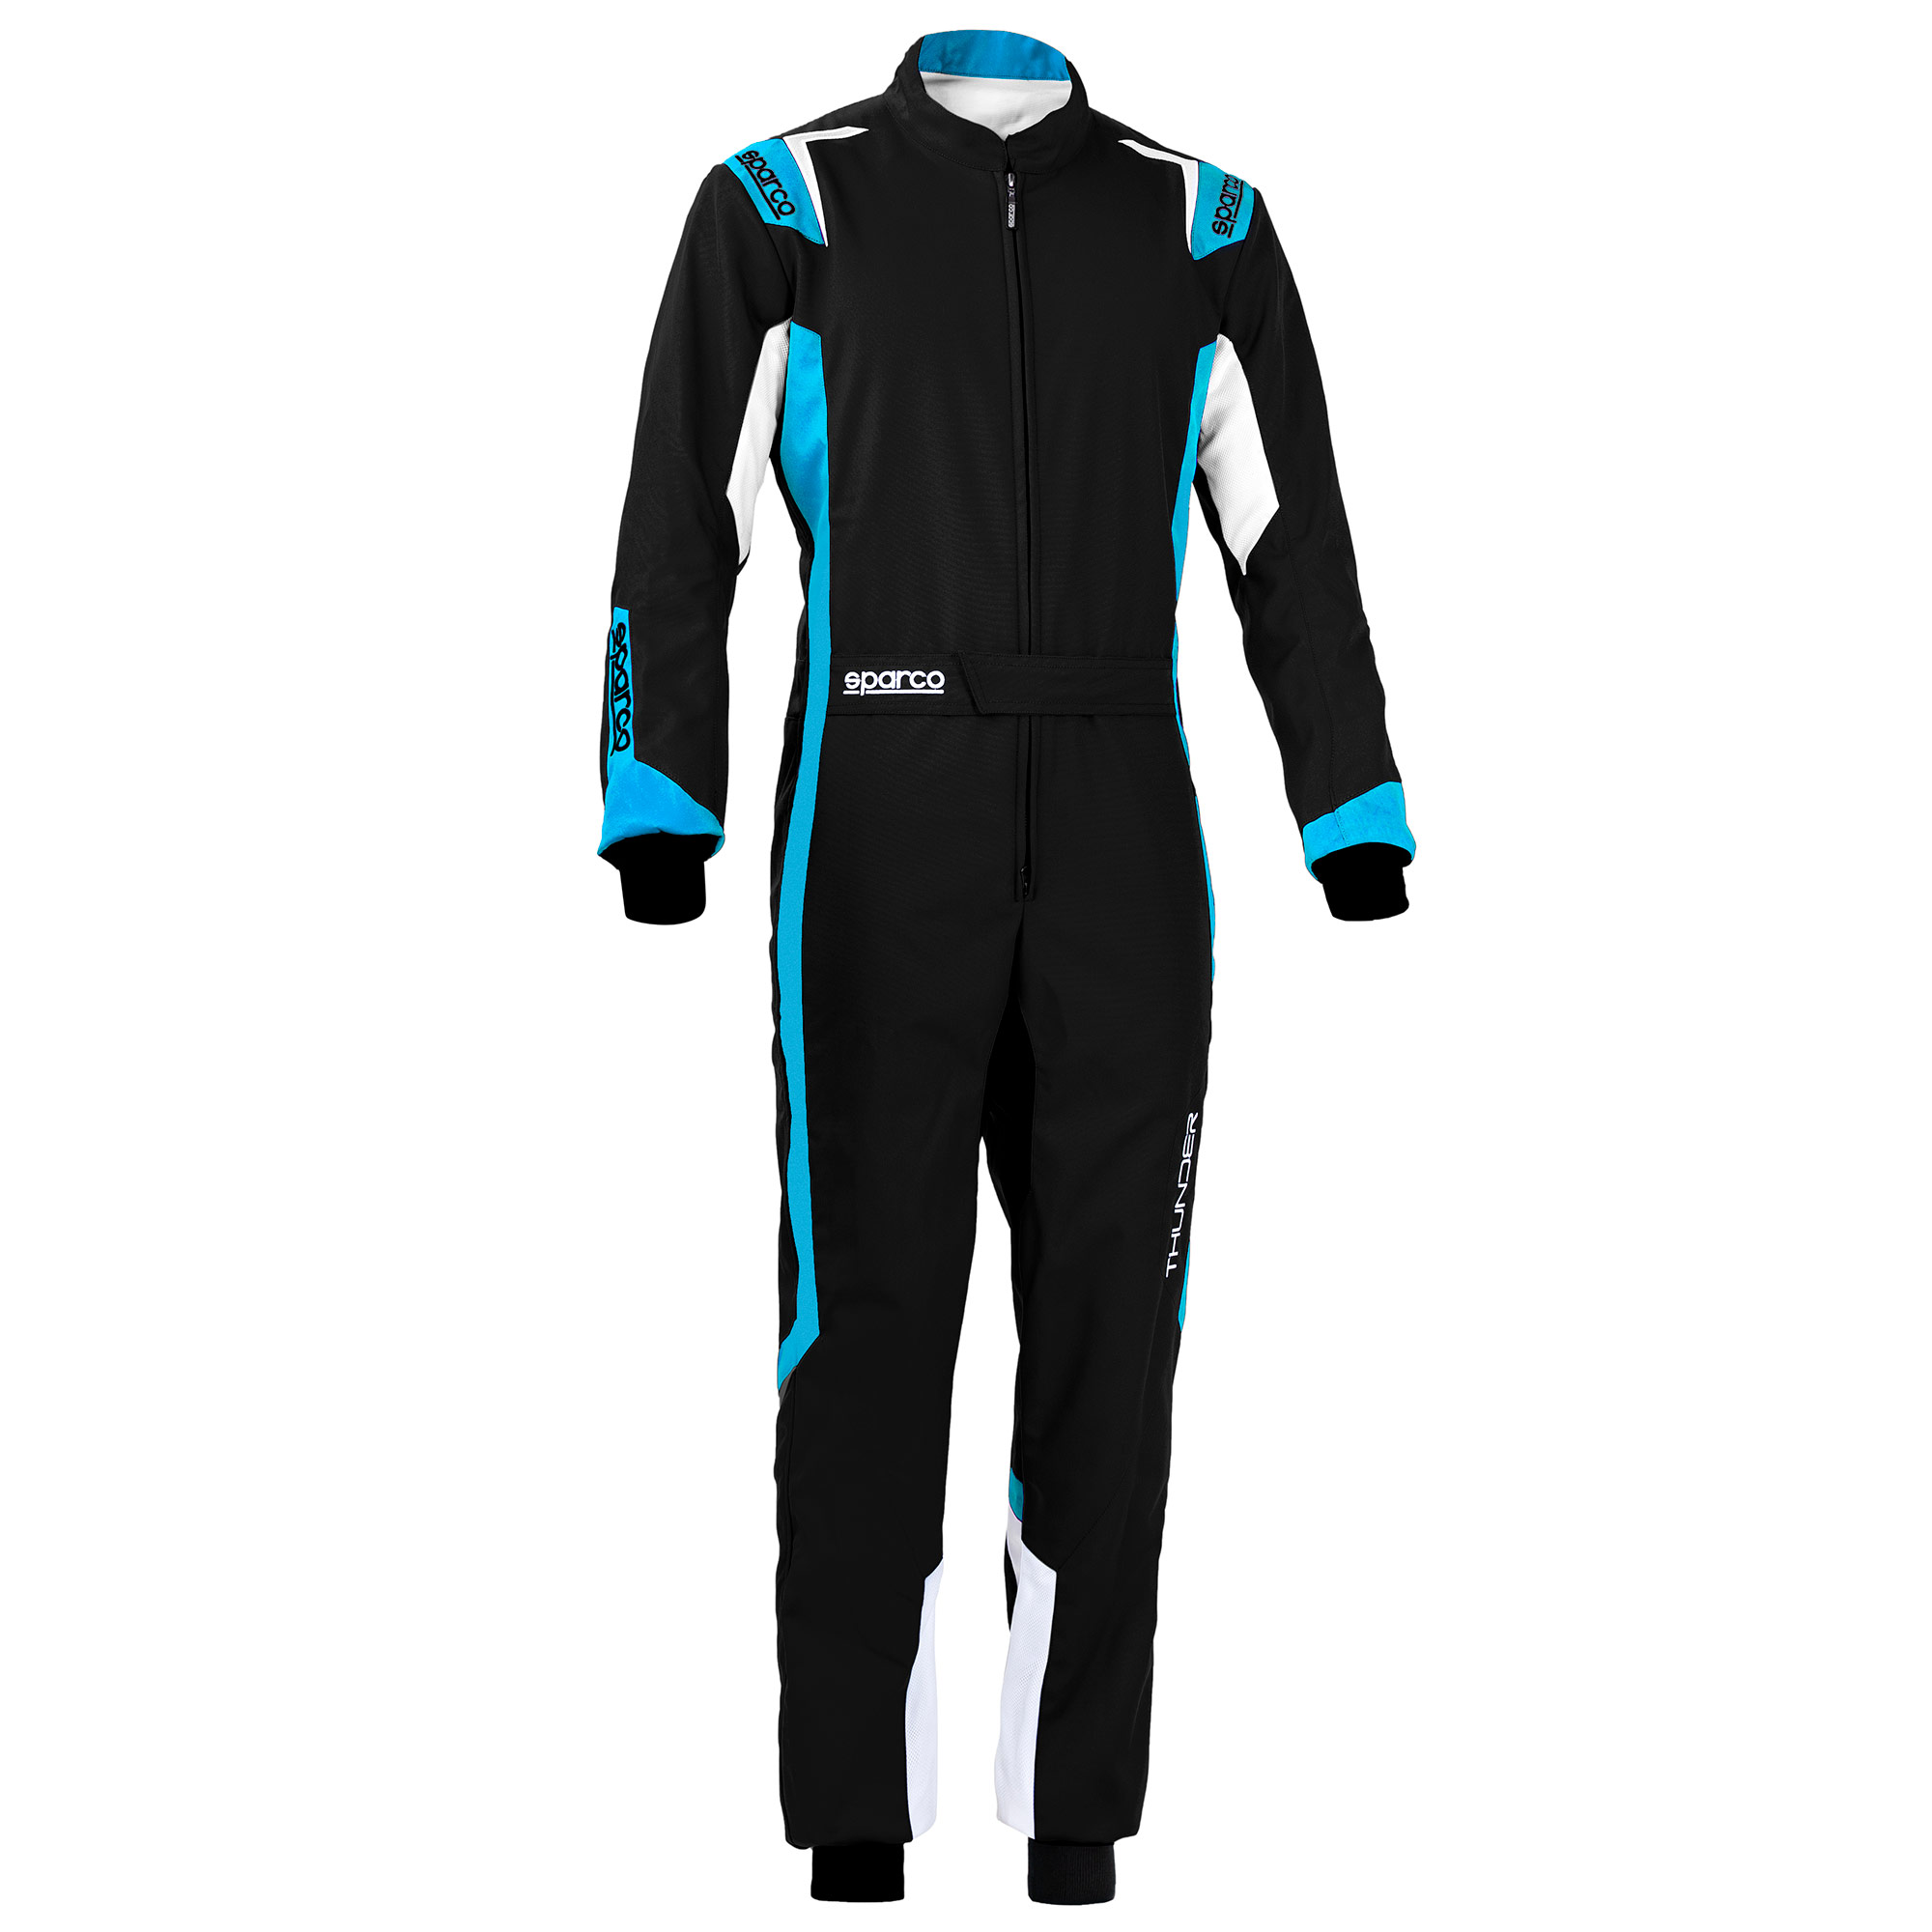 Sparco Thunder CIK FIA Level 2 Approved Karting Suit - Adult & Kids Sizes